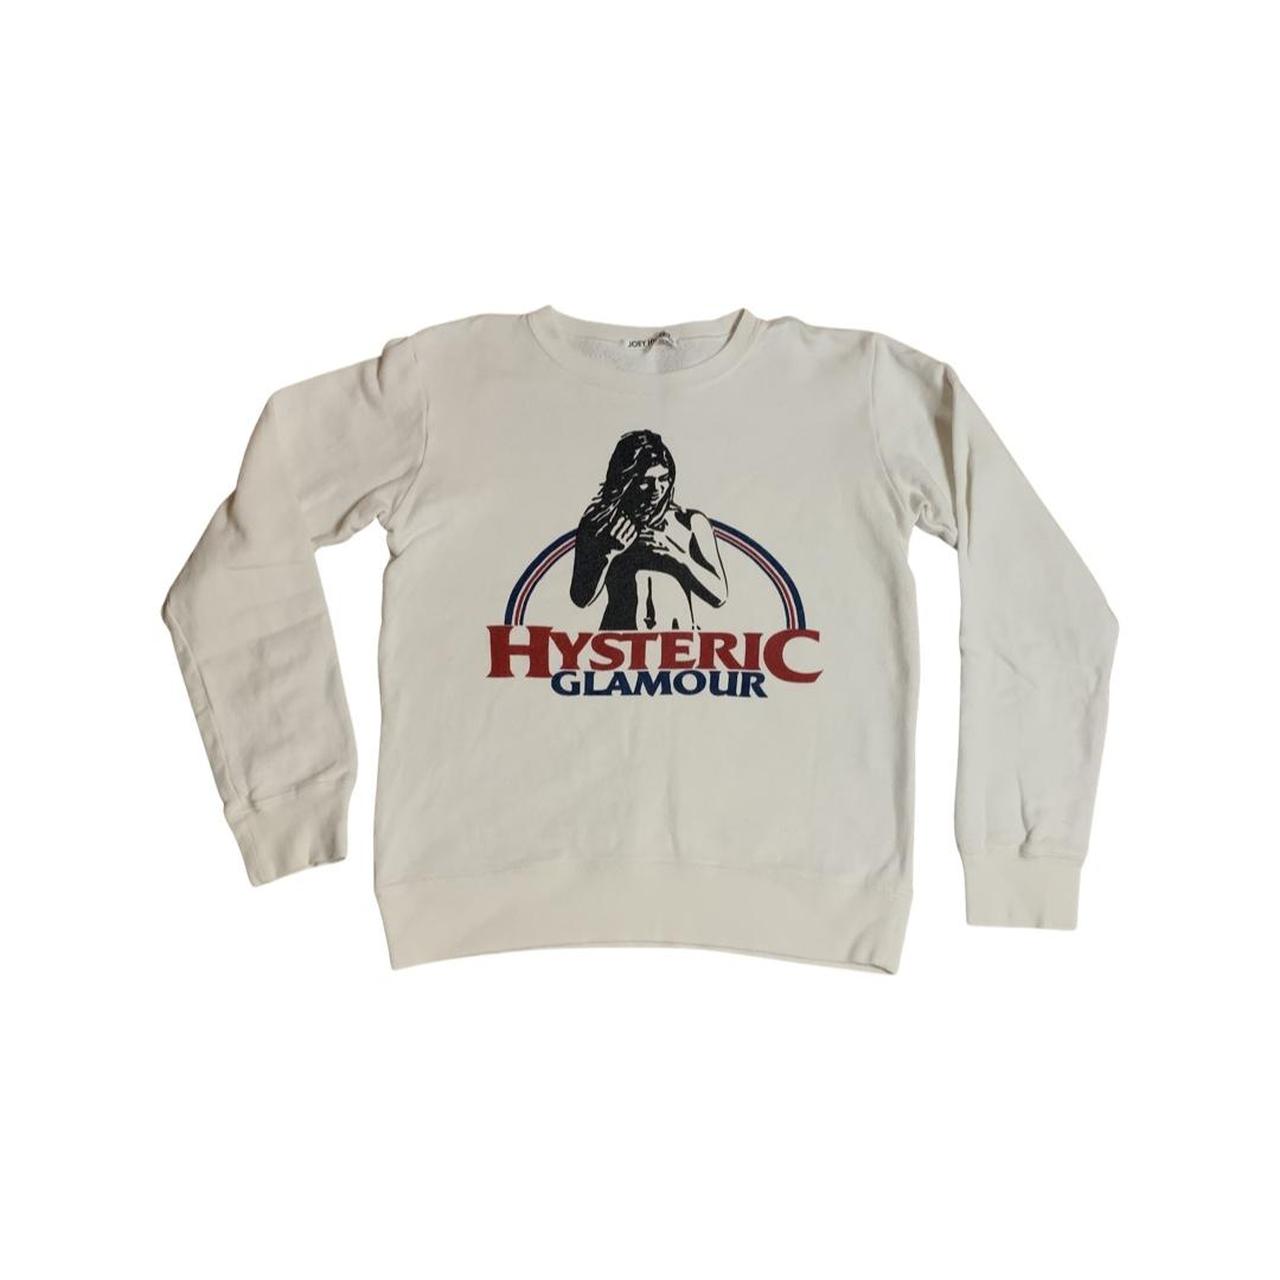 Hysteric Glamour Men's White and Red Sweatshirt